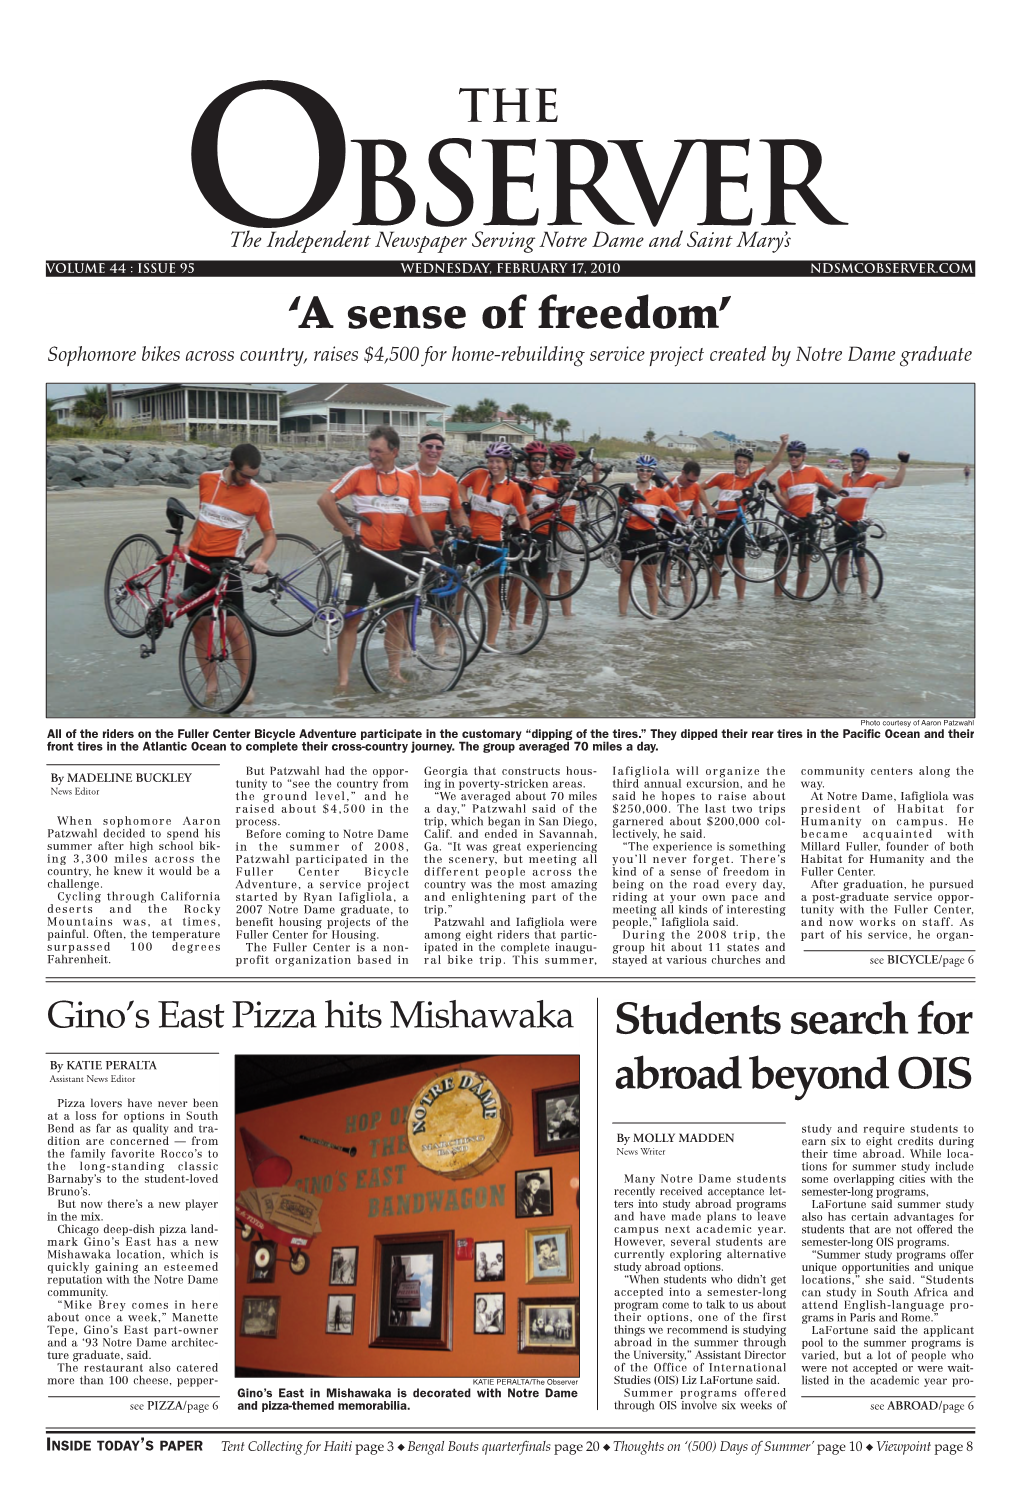 A Sense of Freedom’ Sophomore Bikes Across Country, Raises $4,500 for Home-Rebuilding Service Project Created by Notre Dame Graduate